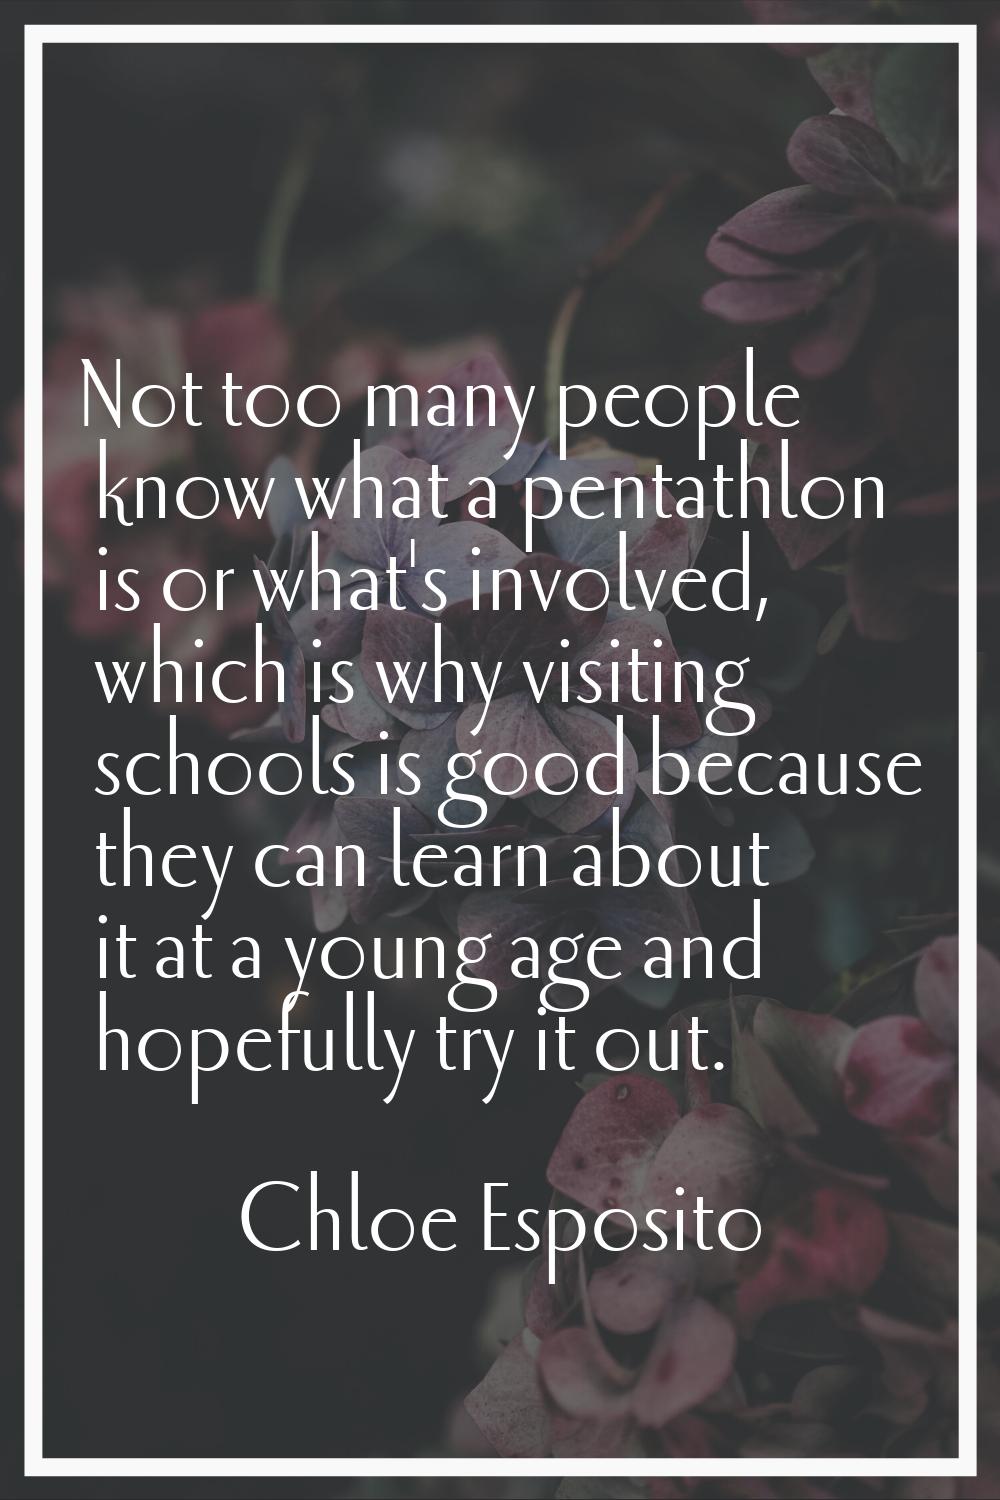 Not too many people know what a pentathlon is or what's involved, which is why visiting schools is 